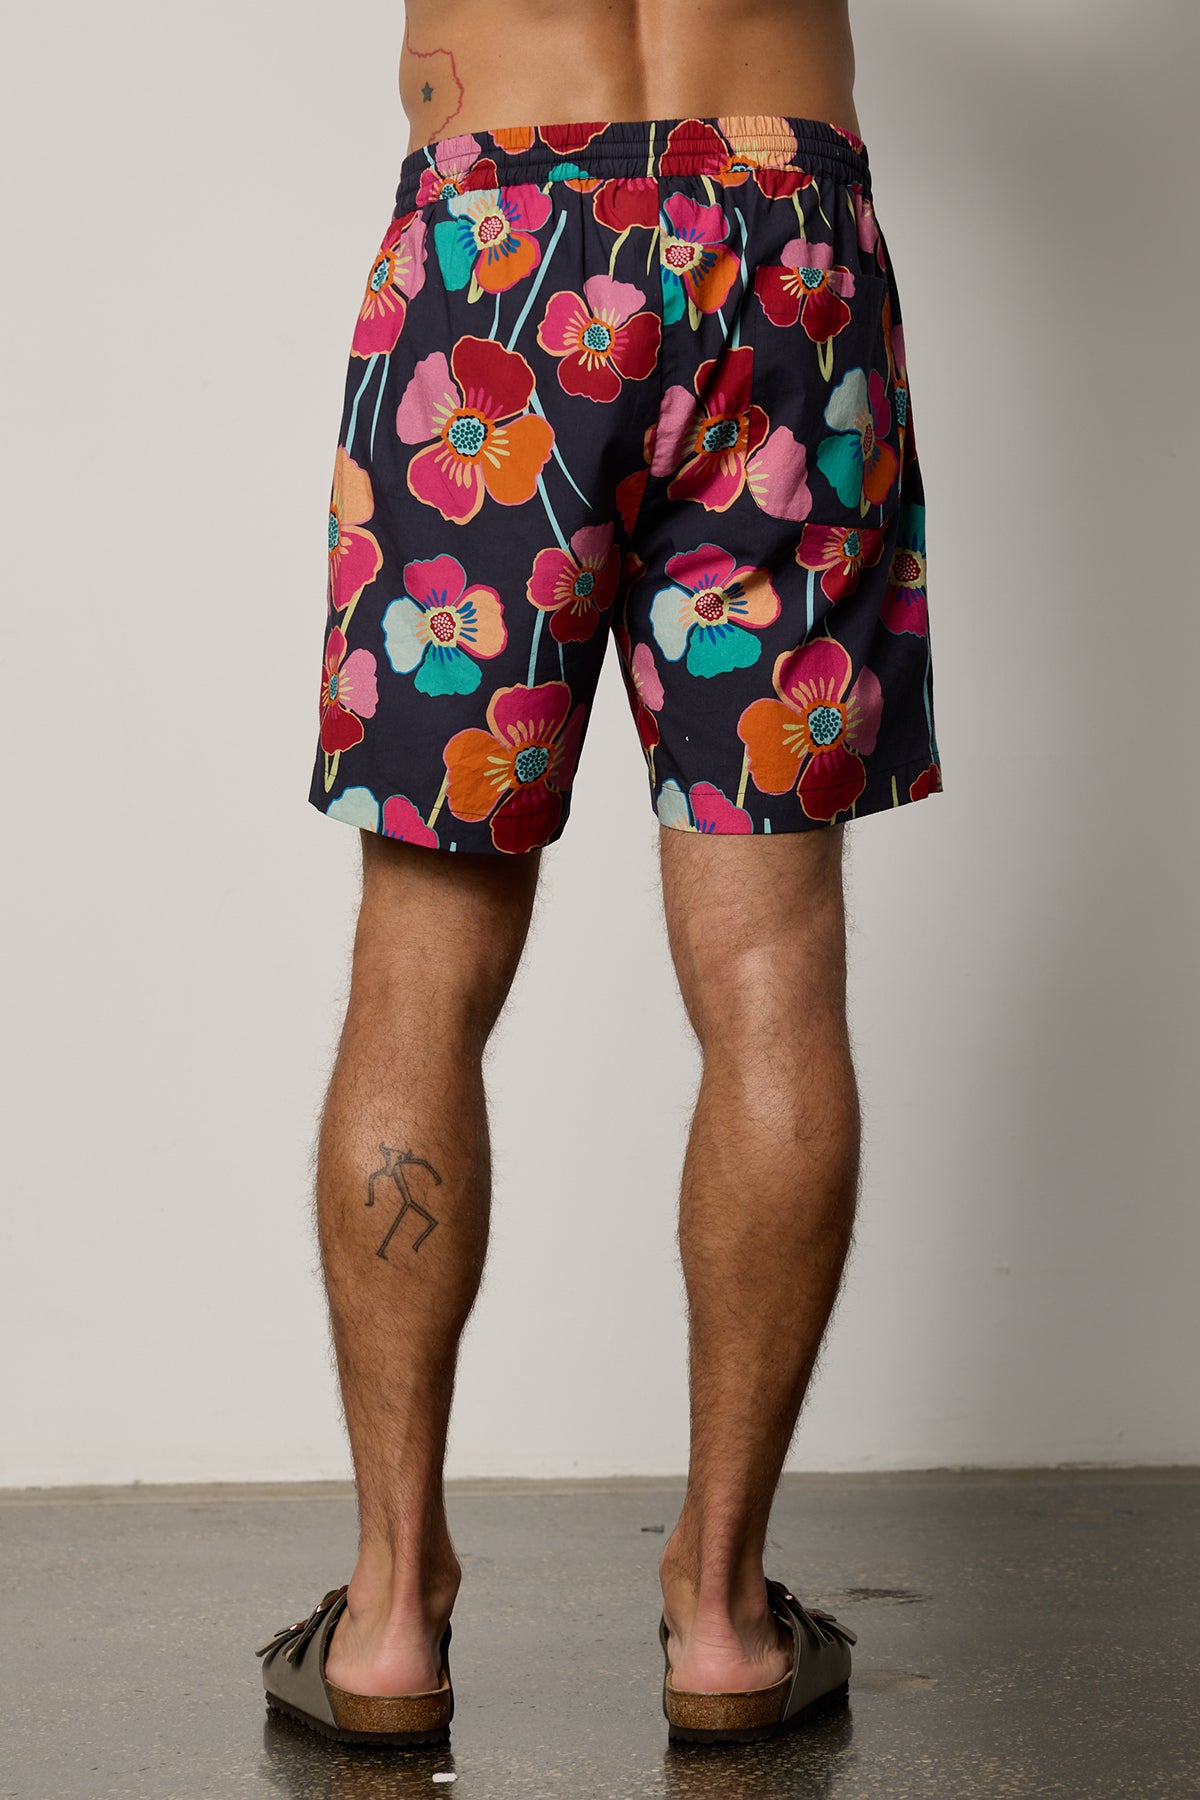 Colt Short back in bahama print with bold, multi colored floral pattern with dark background-26266340950209